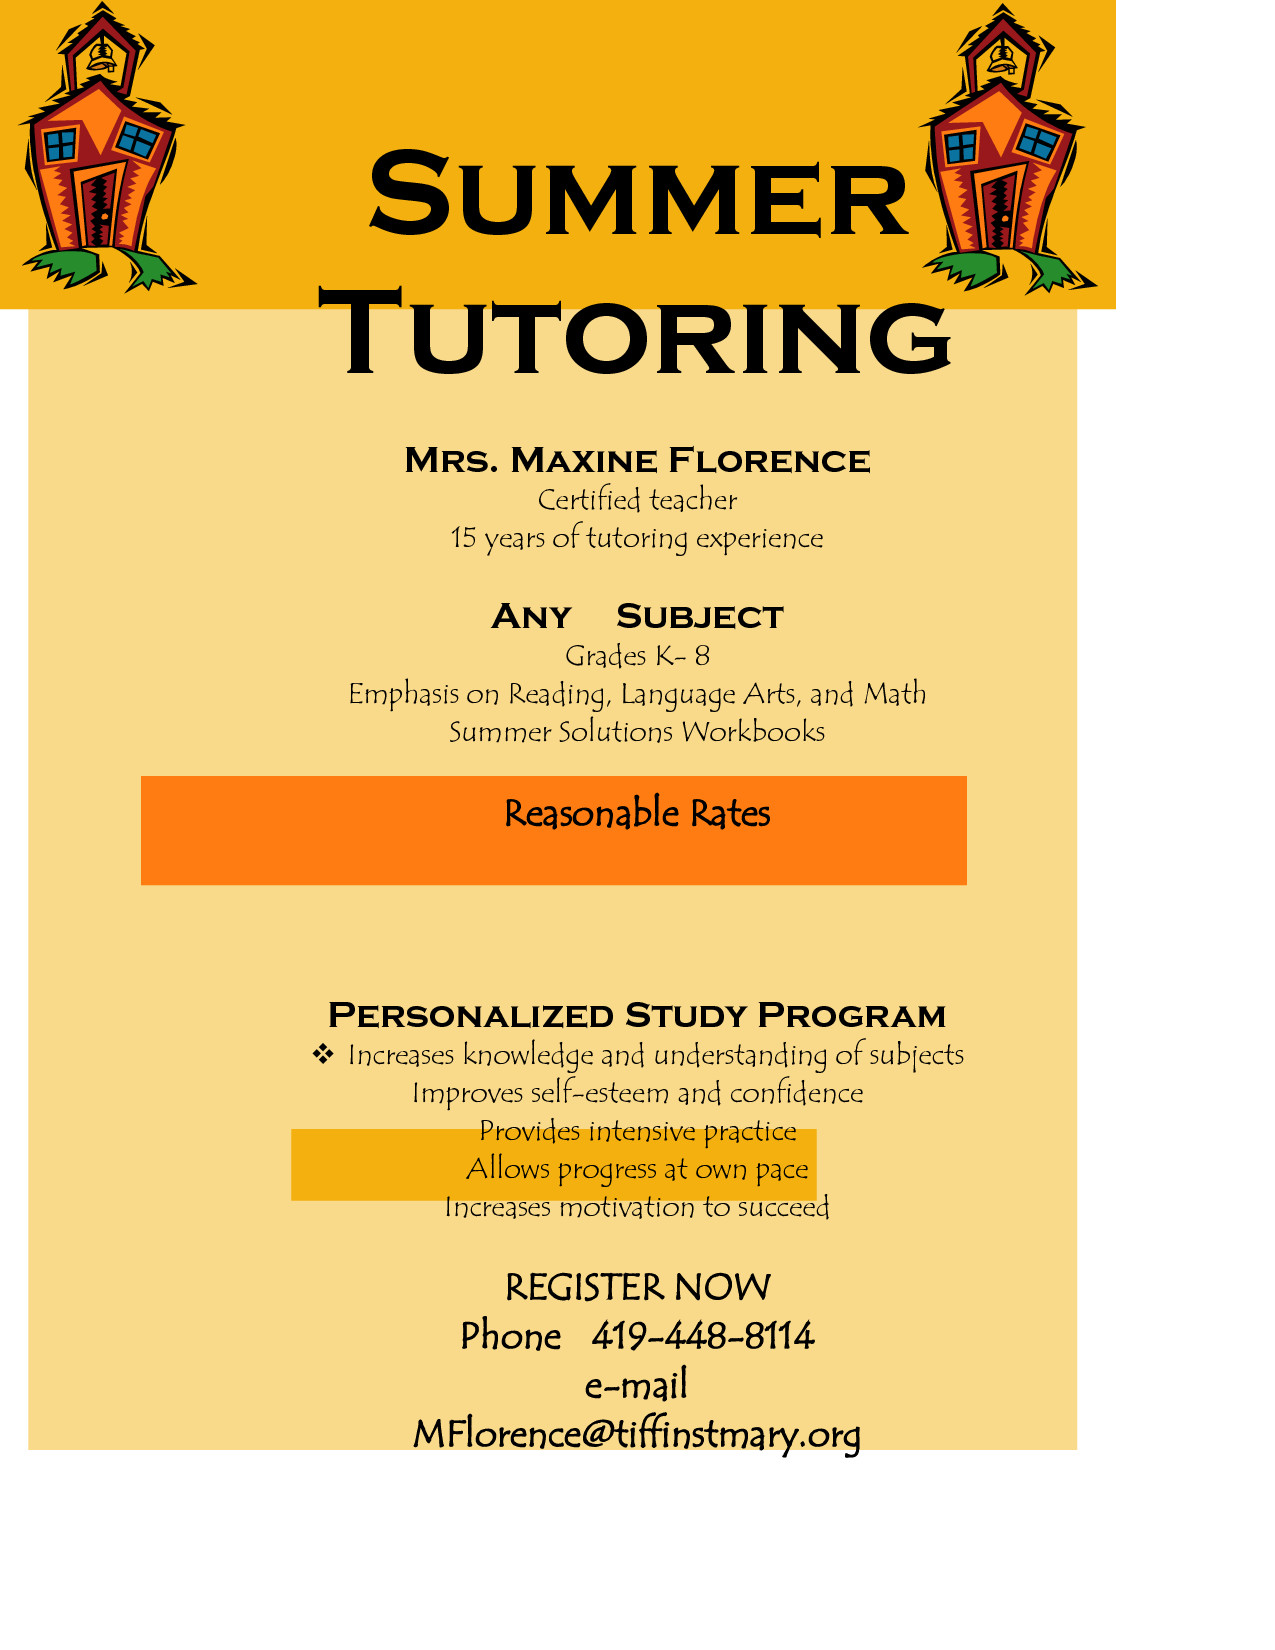 flyer for tutoring services